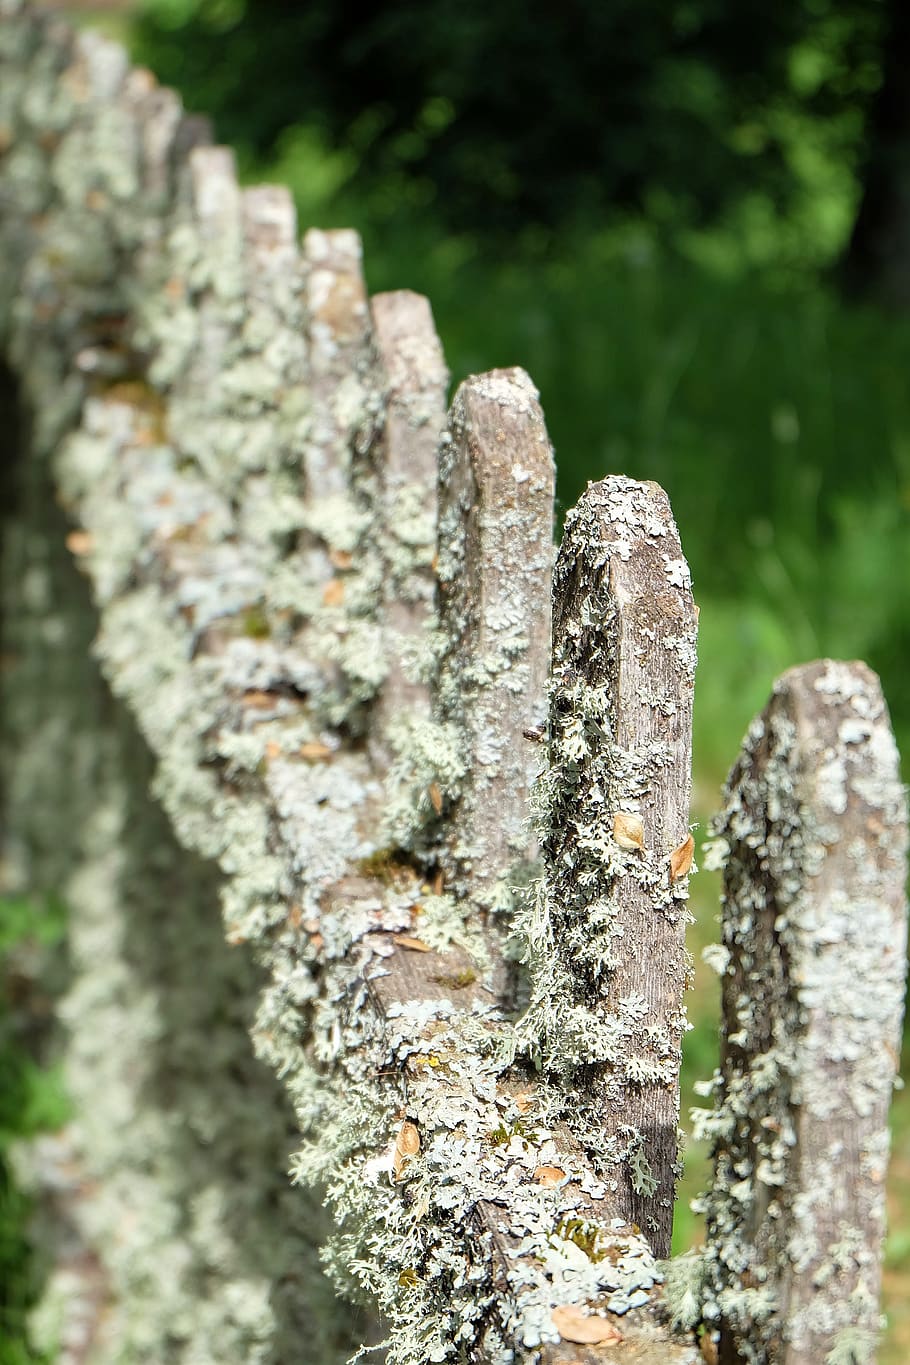 fence, moss, lichen, boards, mossy fence, old fence, closeup, plant, growth, tree